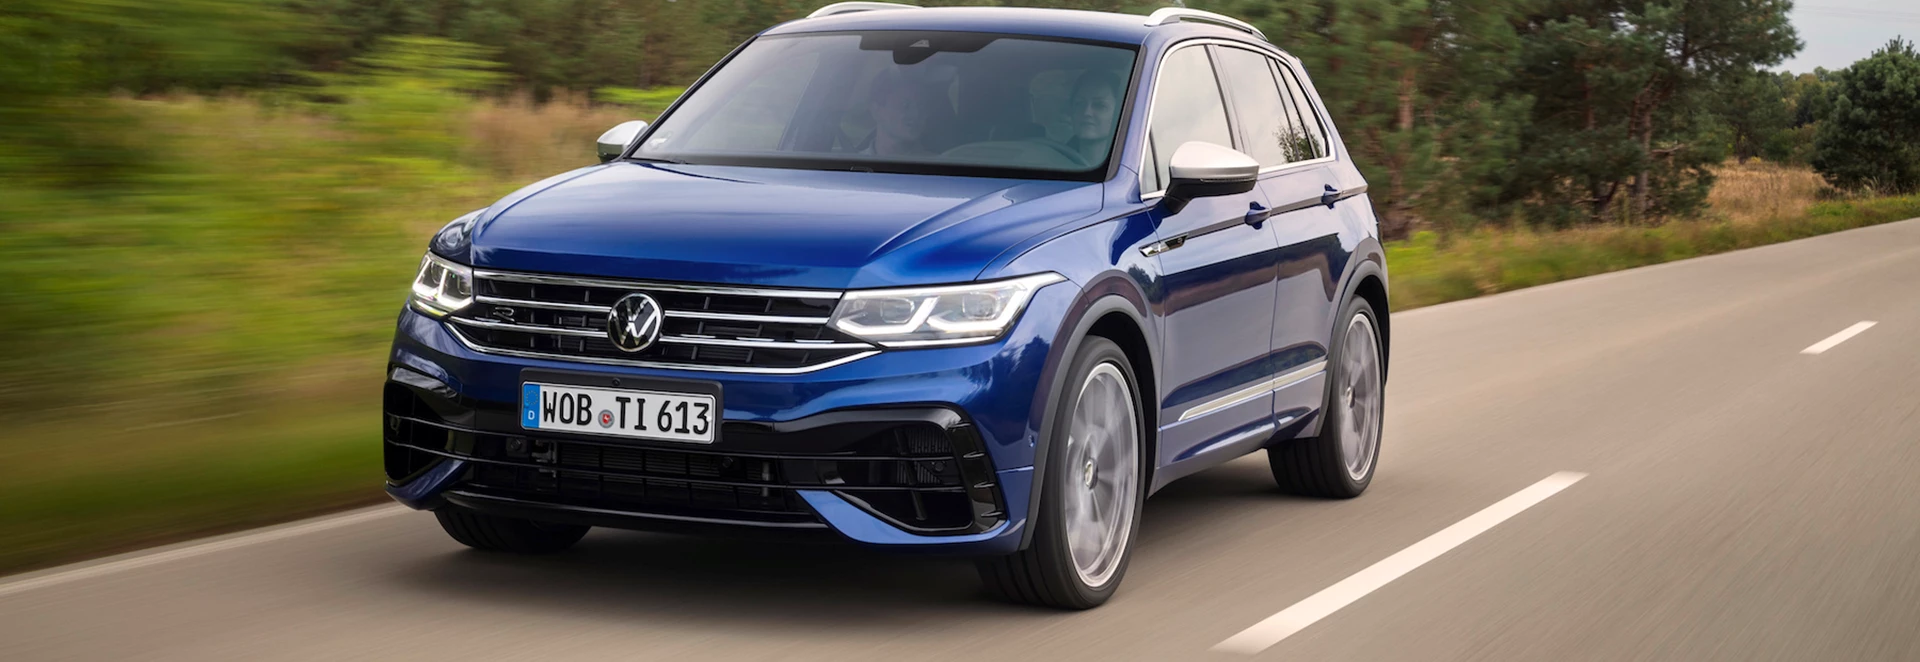 Hot Volkswagen Tiguan R SUV now available to order 